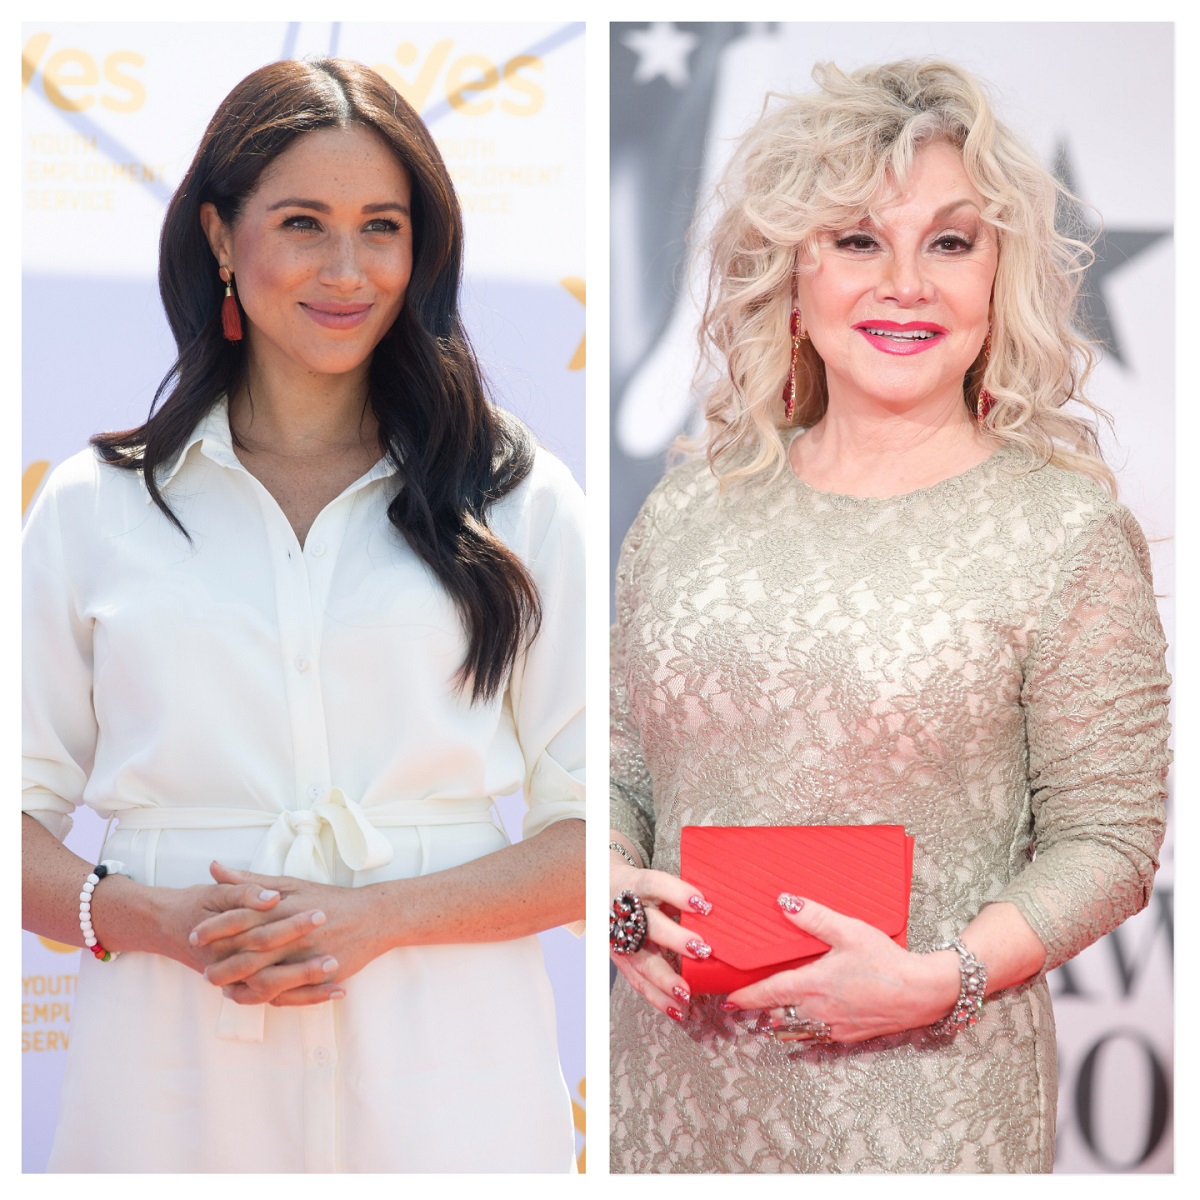 (L): Meghan Markle during official visit to South Africa, (R): Dolly Parton’s sister Stella Parton, who defended Meghan against the British press, at the Brit Awards